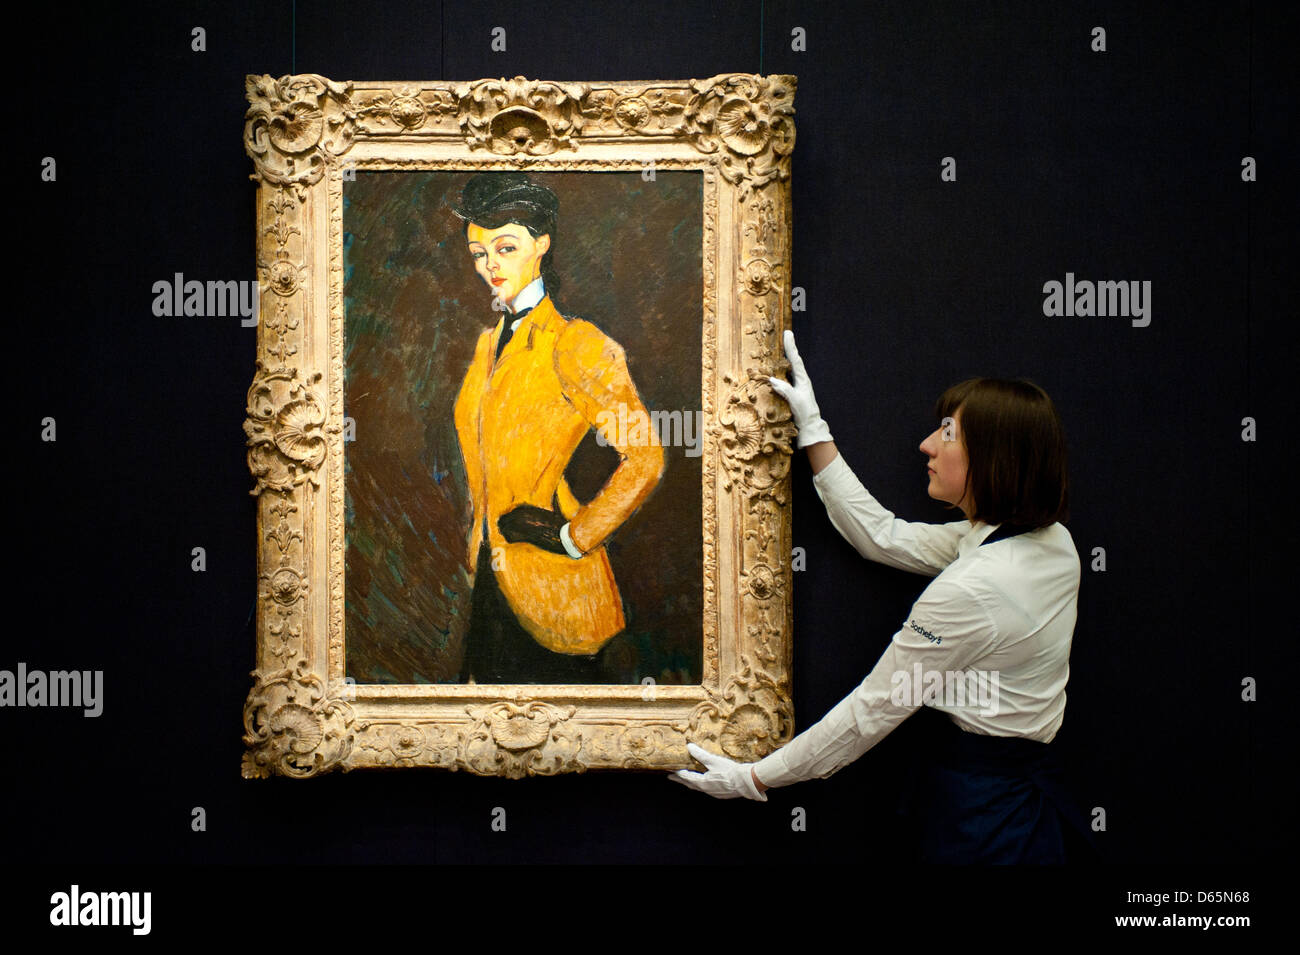 London, UK. 12th April 2013. A Sotheby's employee poses in front of Amedeo Modigliani  'L'Amazone' (Est. $20-30 million). The work will go on sale at Sotheby’s New York in May 2013. The Blockbuster sales at include works by Richter, Modigliani, Picasso, Rodin, Bacon, Cezanne. Credit: Piero Cruciatti / Alamy Live News Stock Photo